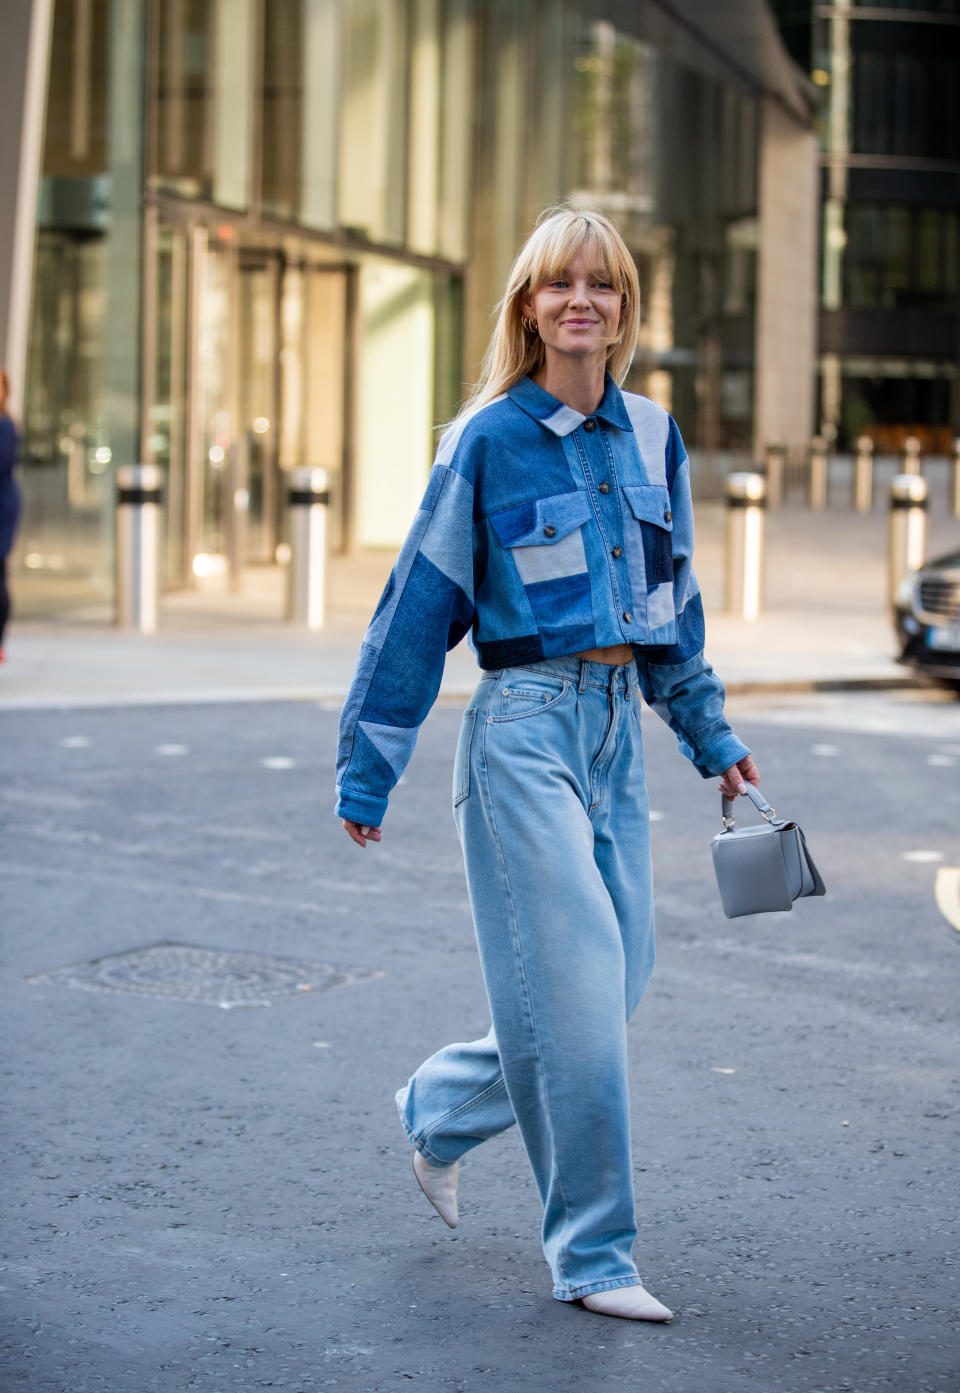 Jeanette Friis Madsen is seen wearing denim jeans and a coordinating patchwork denim jacket outside David Koma. [Photo: Getty Images]